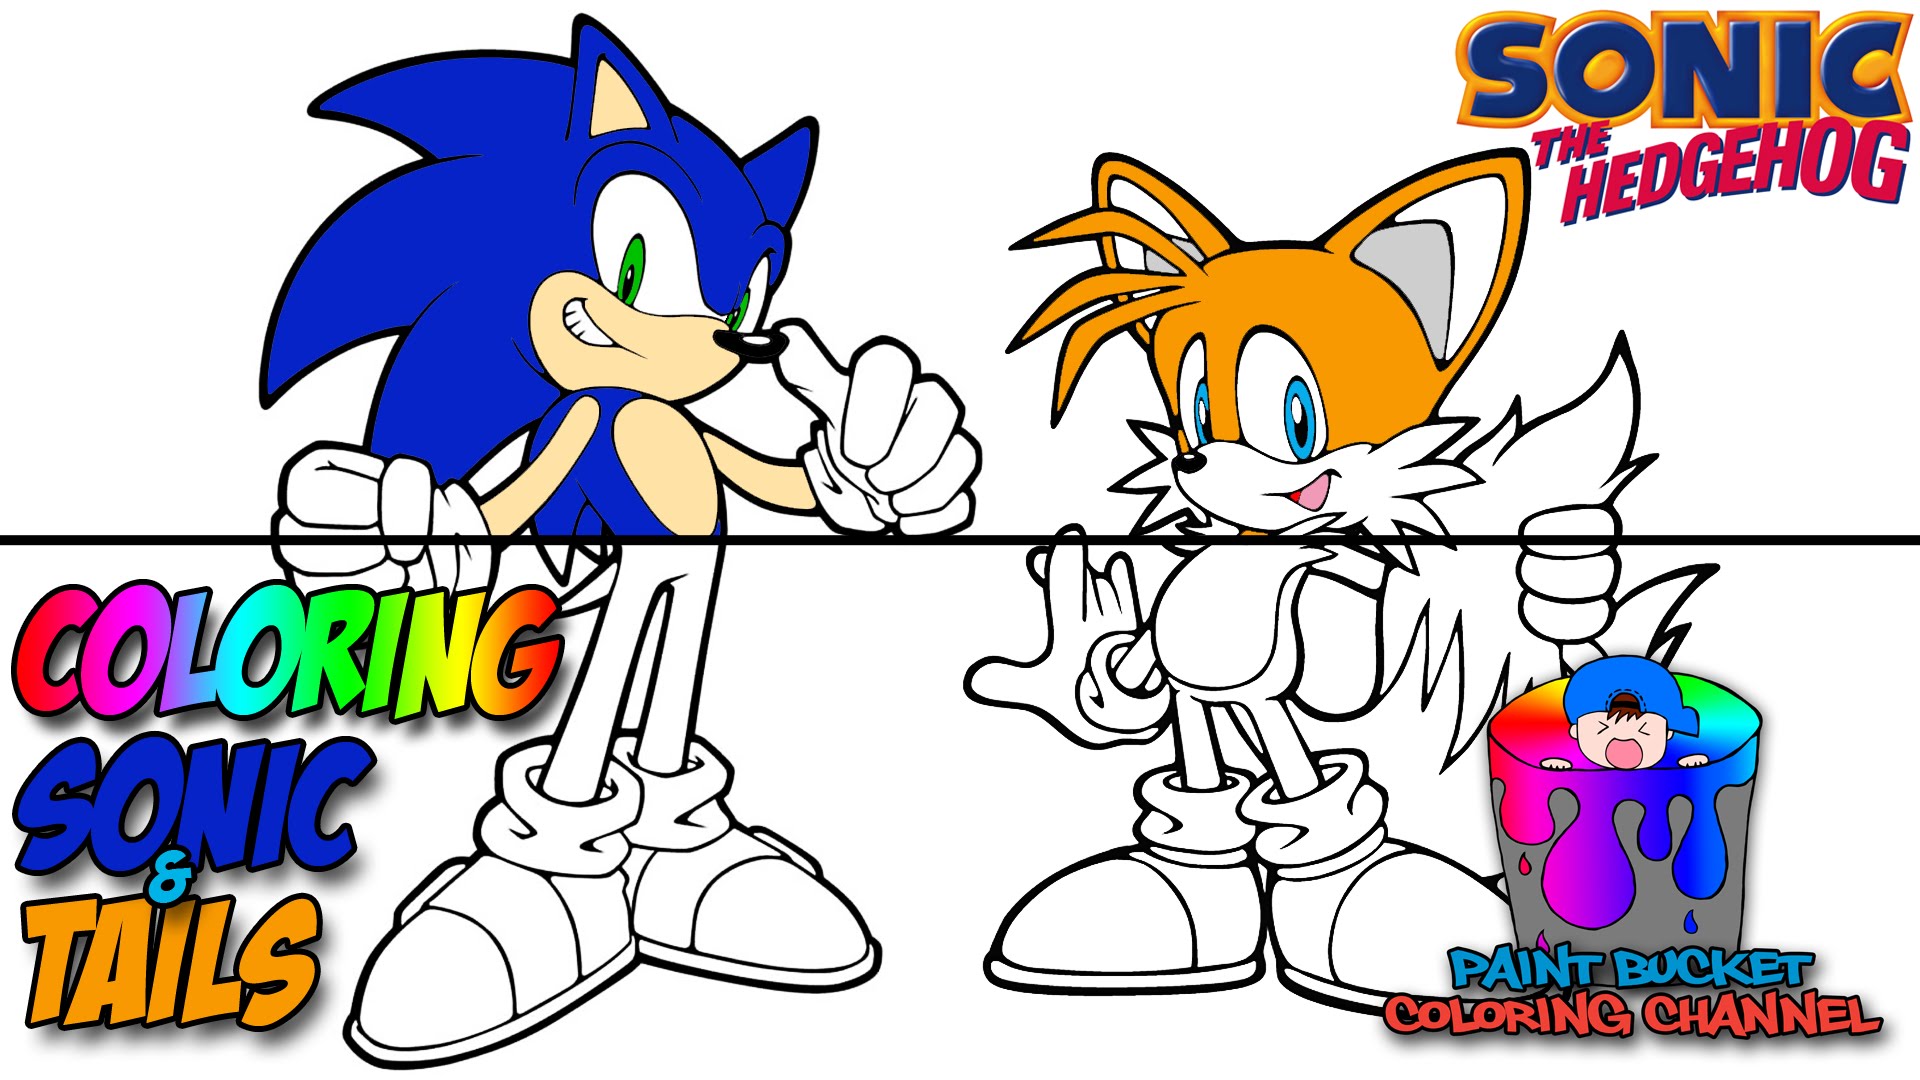 Home sonic. Tails Sonic 2 the movie Coloring. Tails Sega. Tails Coloring. Classic Sonic Tails and Knuckles.